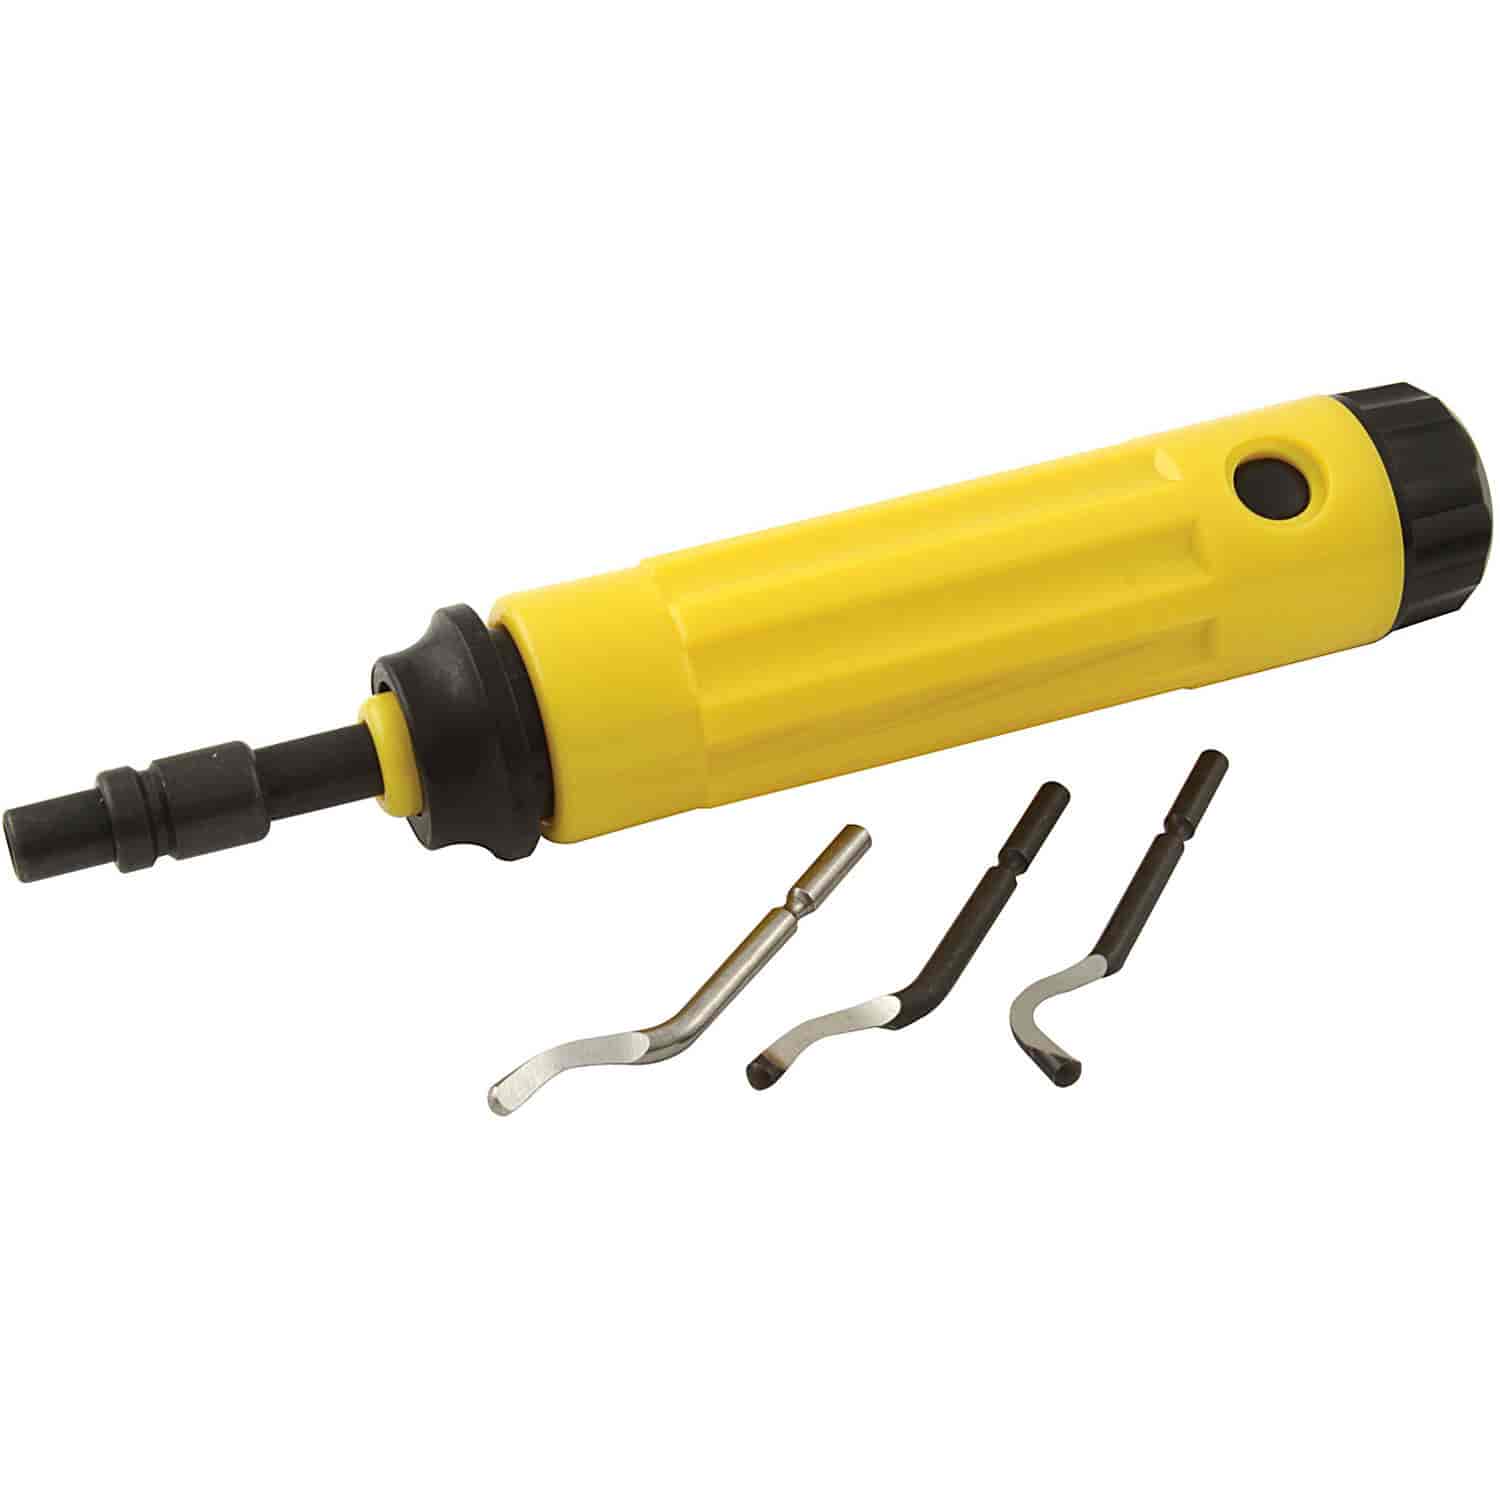 Deburring Tool Includes: (1) Handle